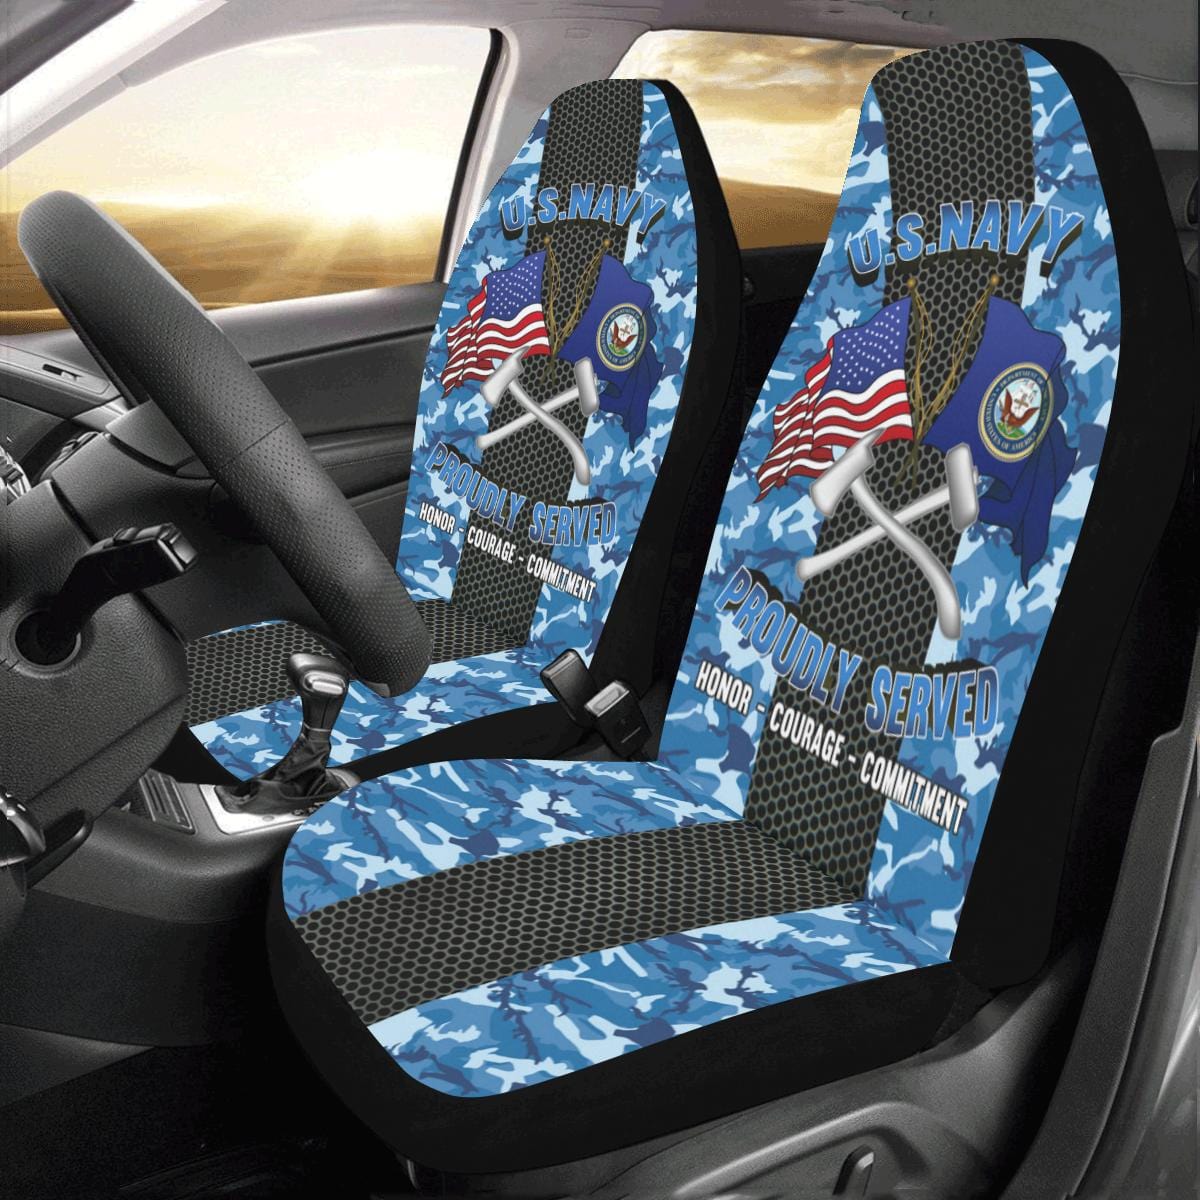 Navy Damage Controlman Navy DC Car Seat Covers (Set of 2)-SeatCovers-Navy-Rate-Veterans Nation